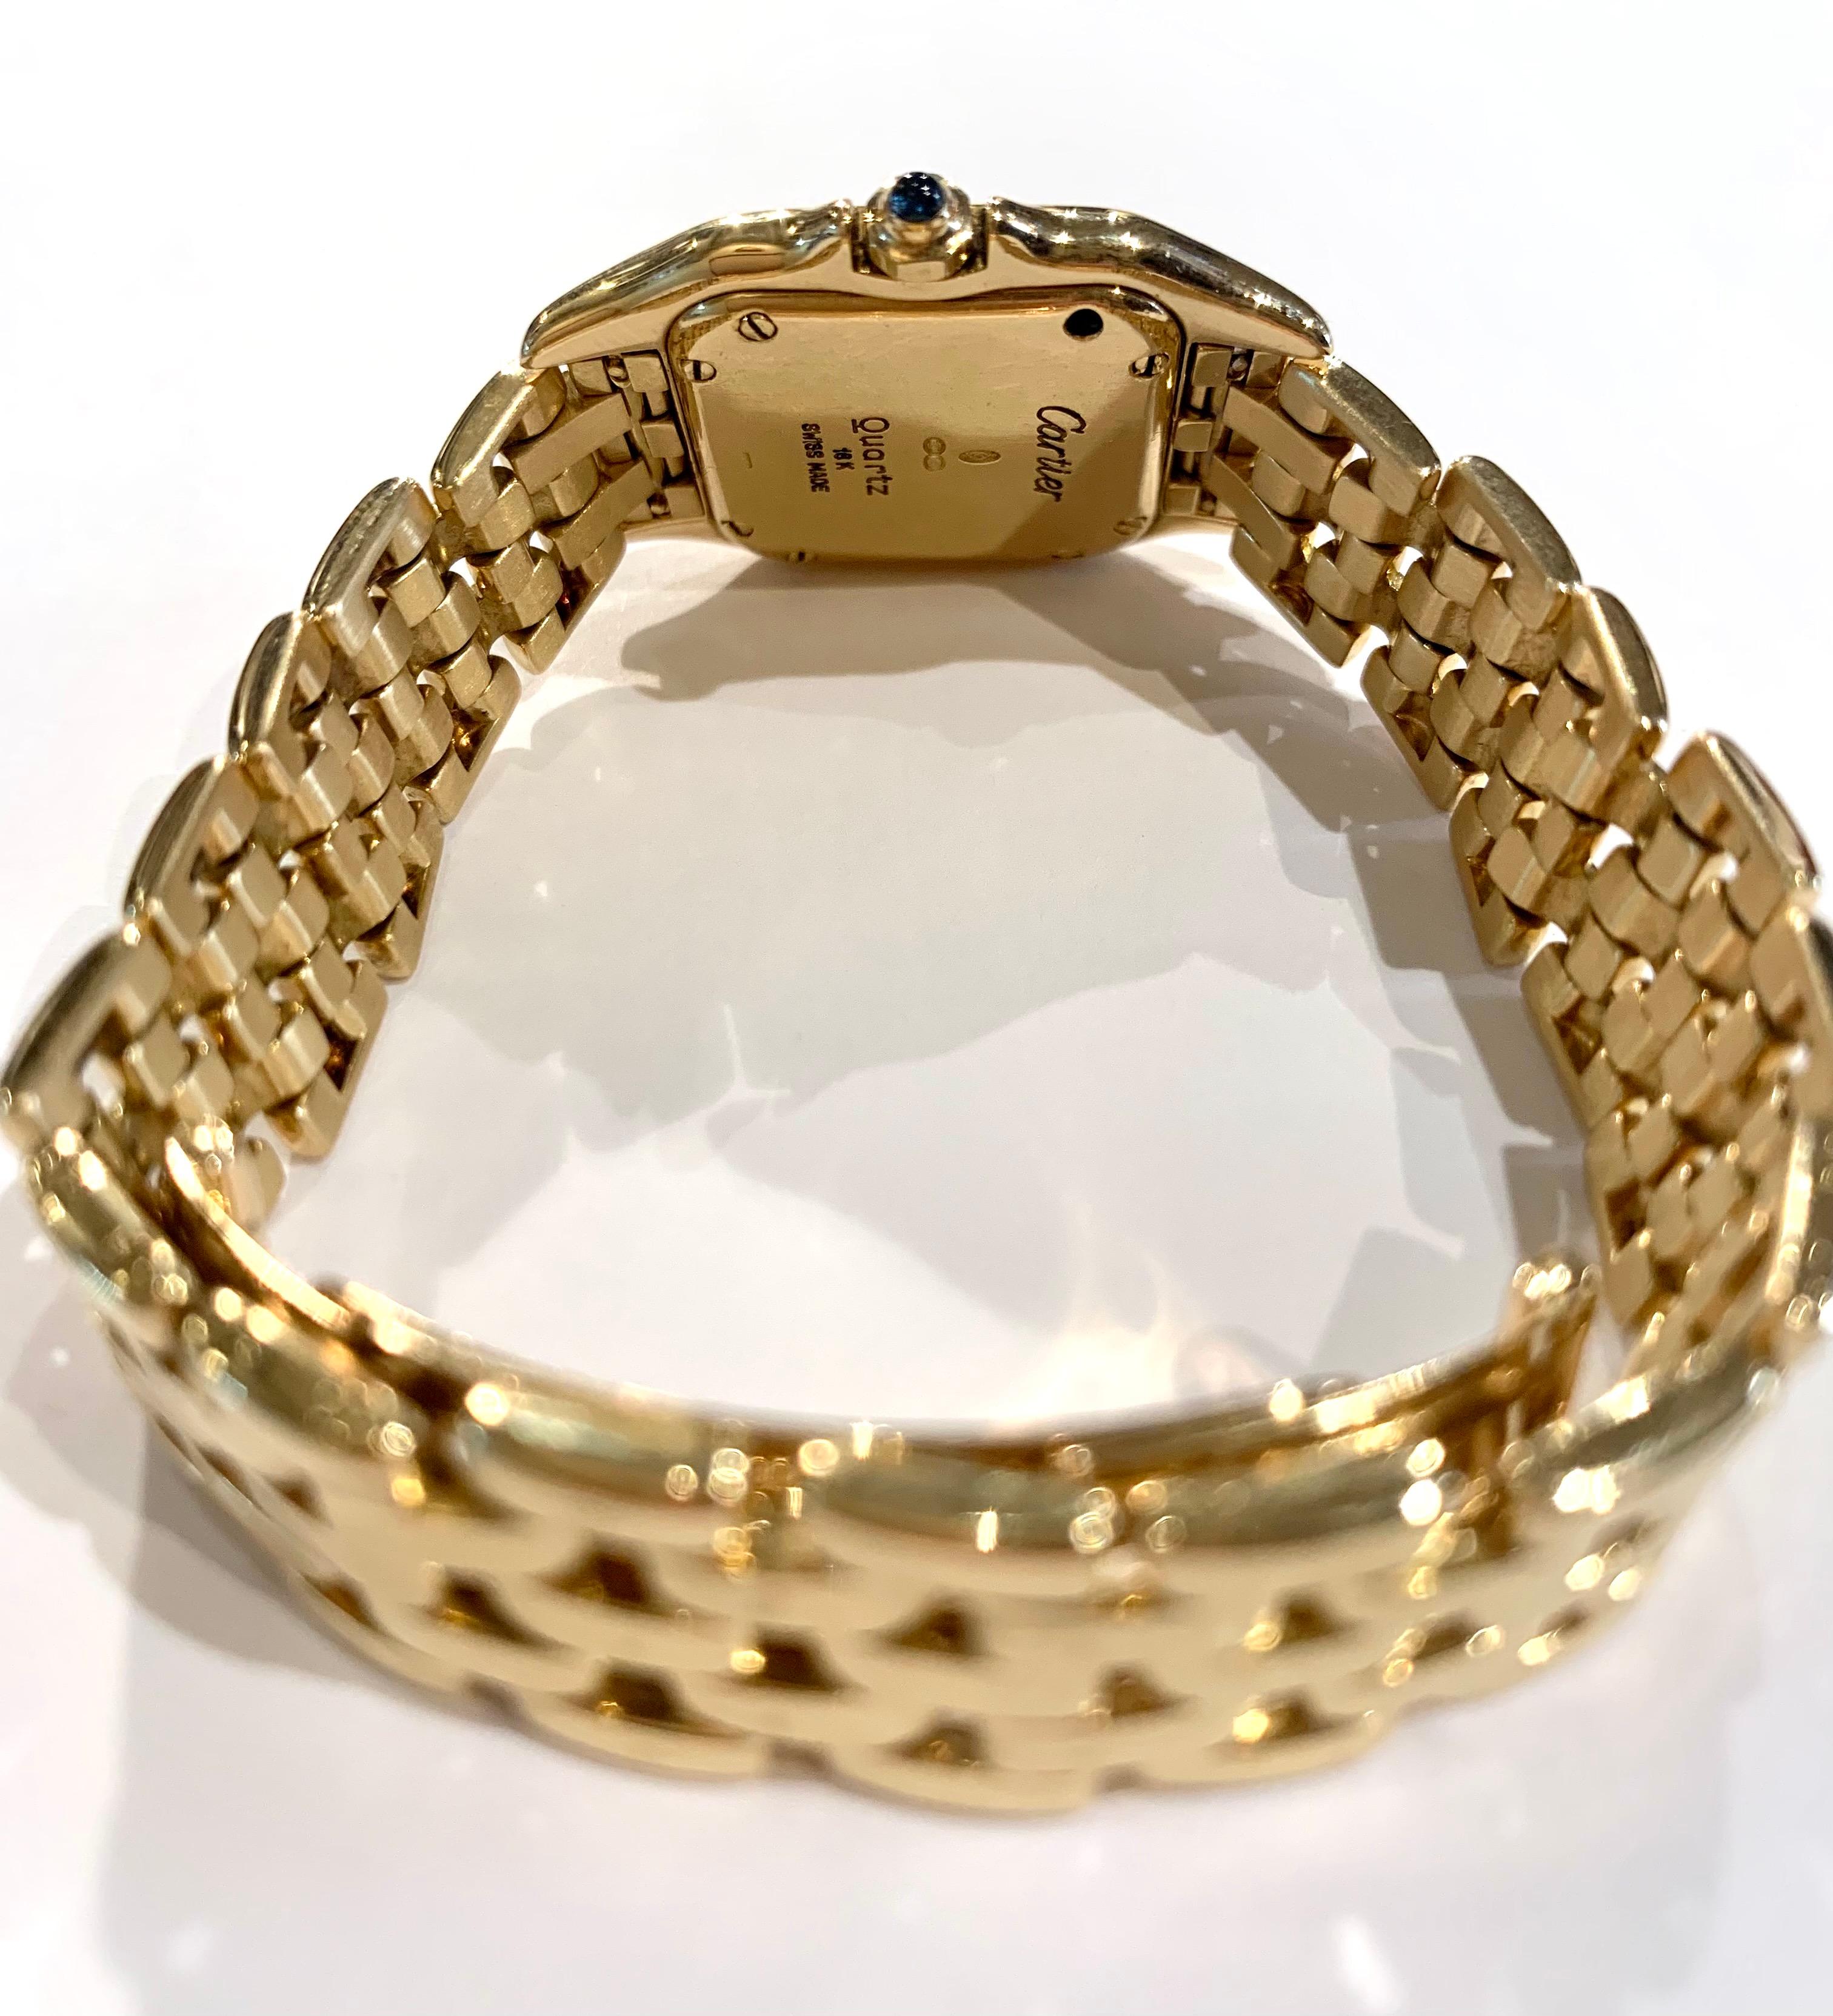 Contemporary Cartier Panthere 18 Carats Yellow Gold Lady’s Watch